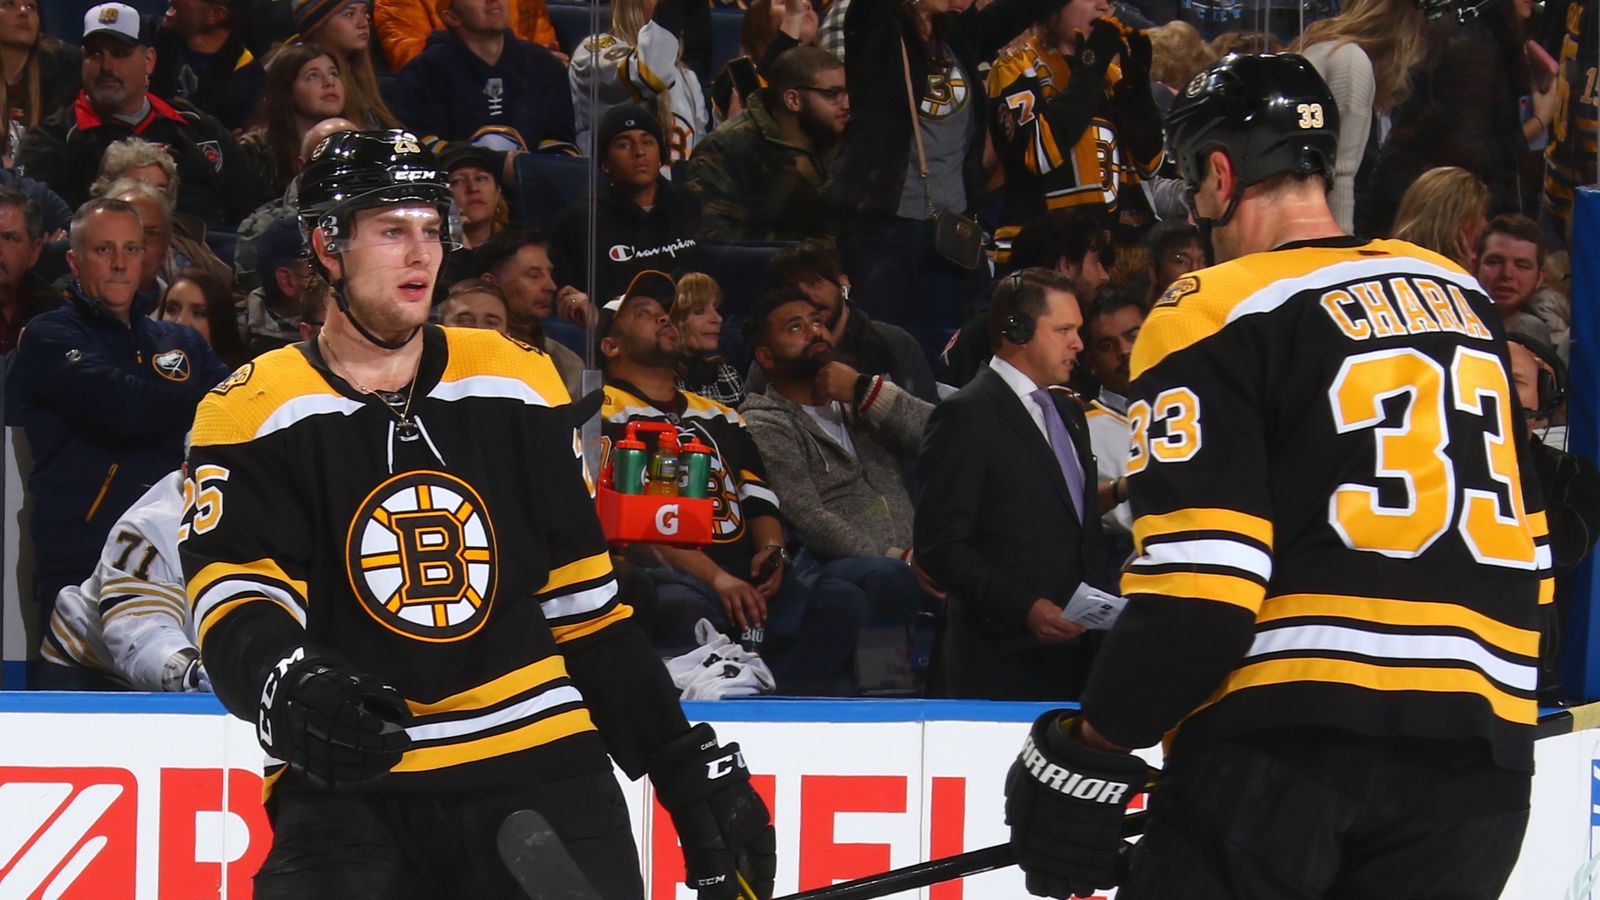 Brandon Carlo scores shorthanded to tie game with first career